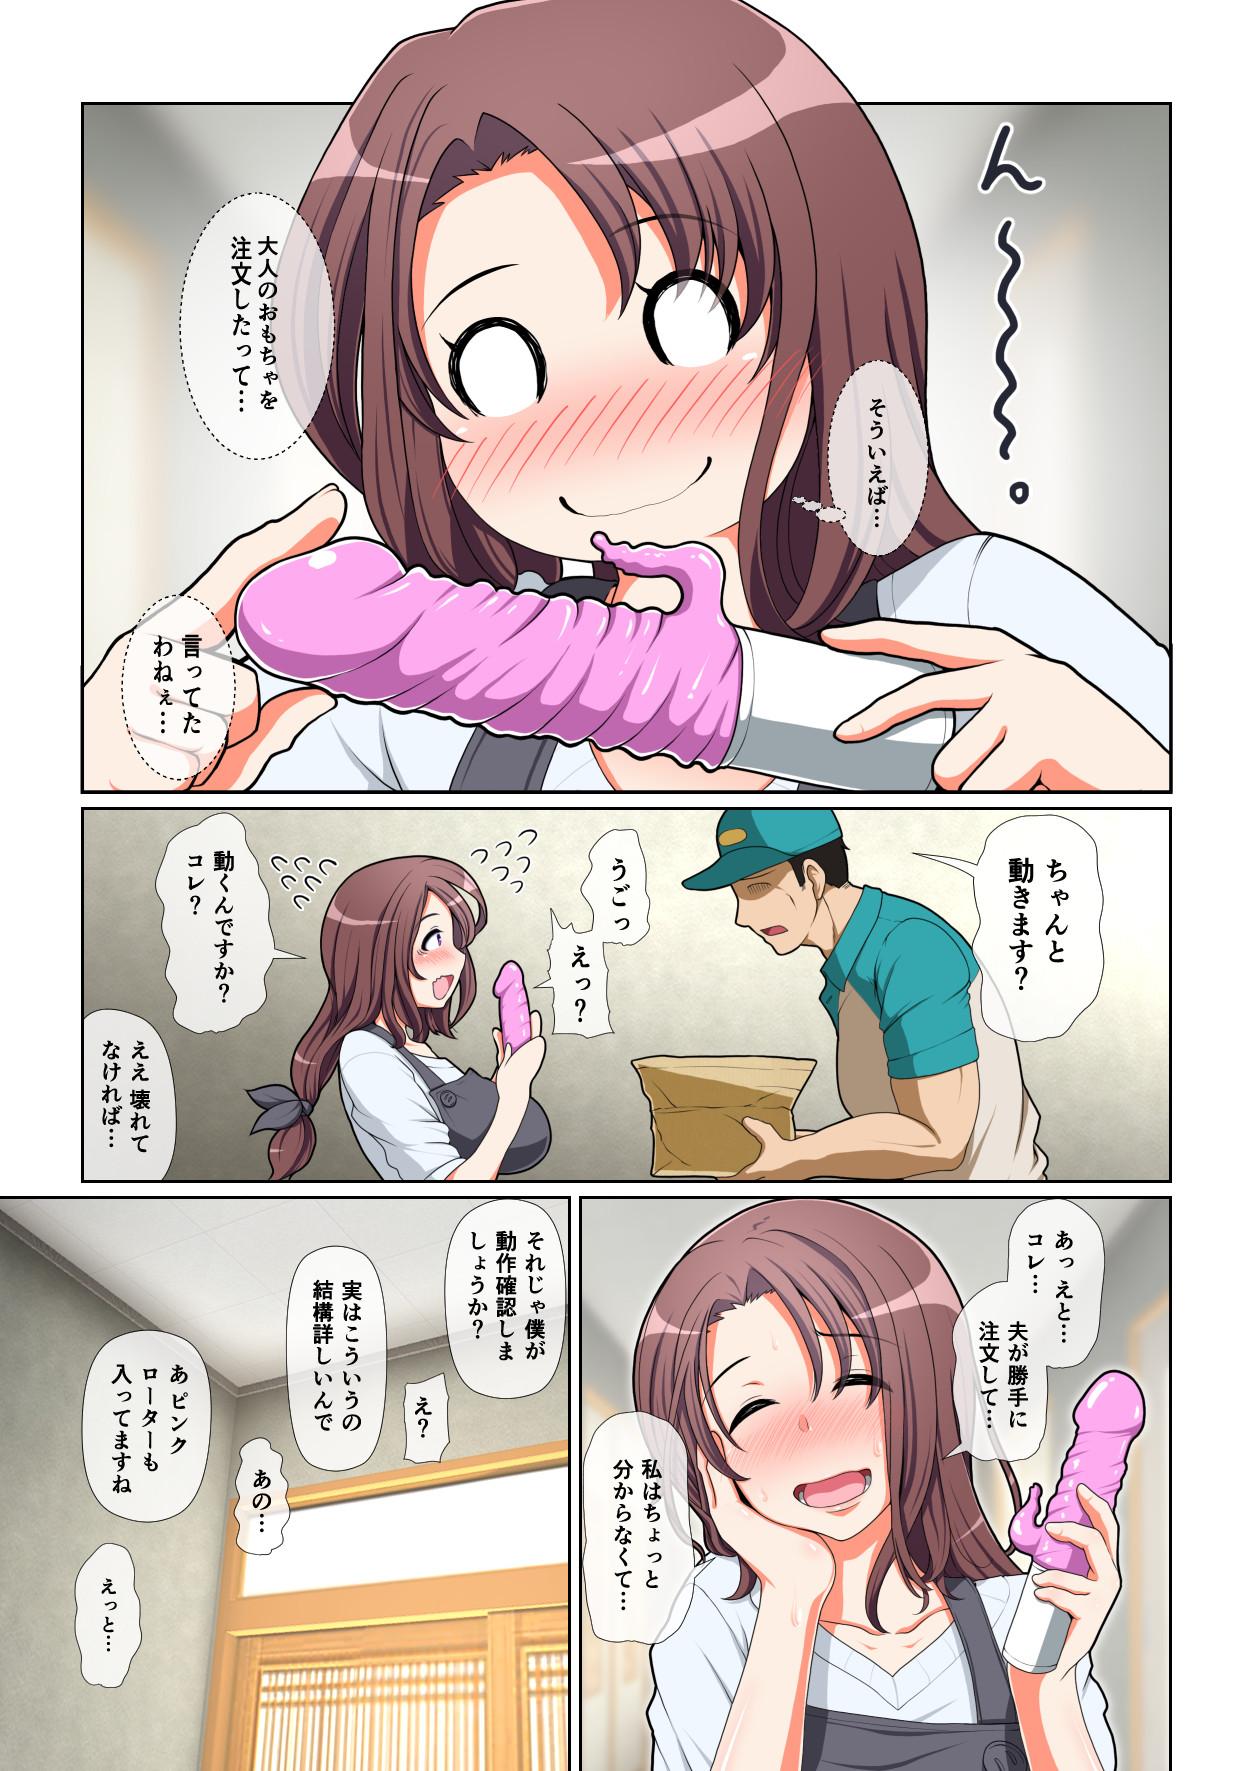 Blowing ドスケベな人妻 - Original Girl On Girl - Page 7